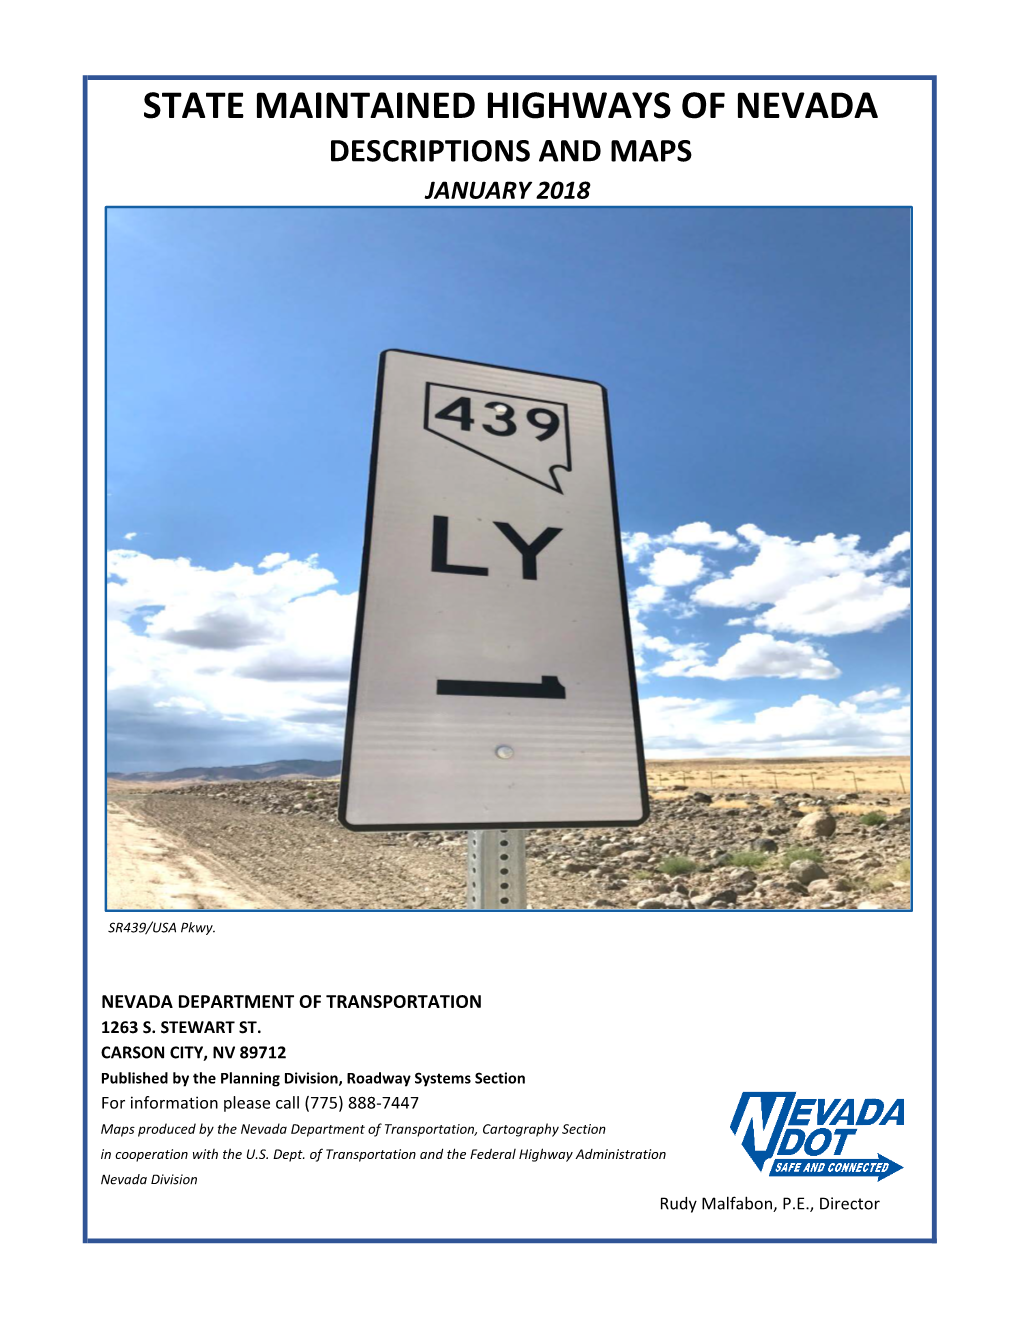 State Maintained Highways of Nevada Descriptions and Maps January 2018